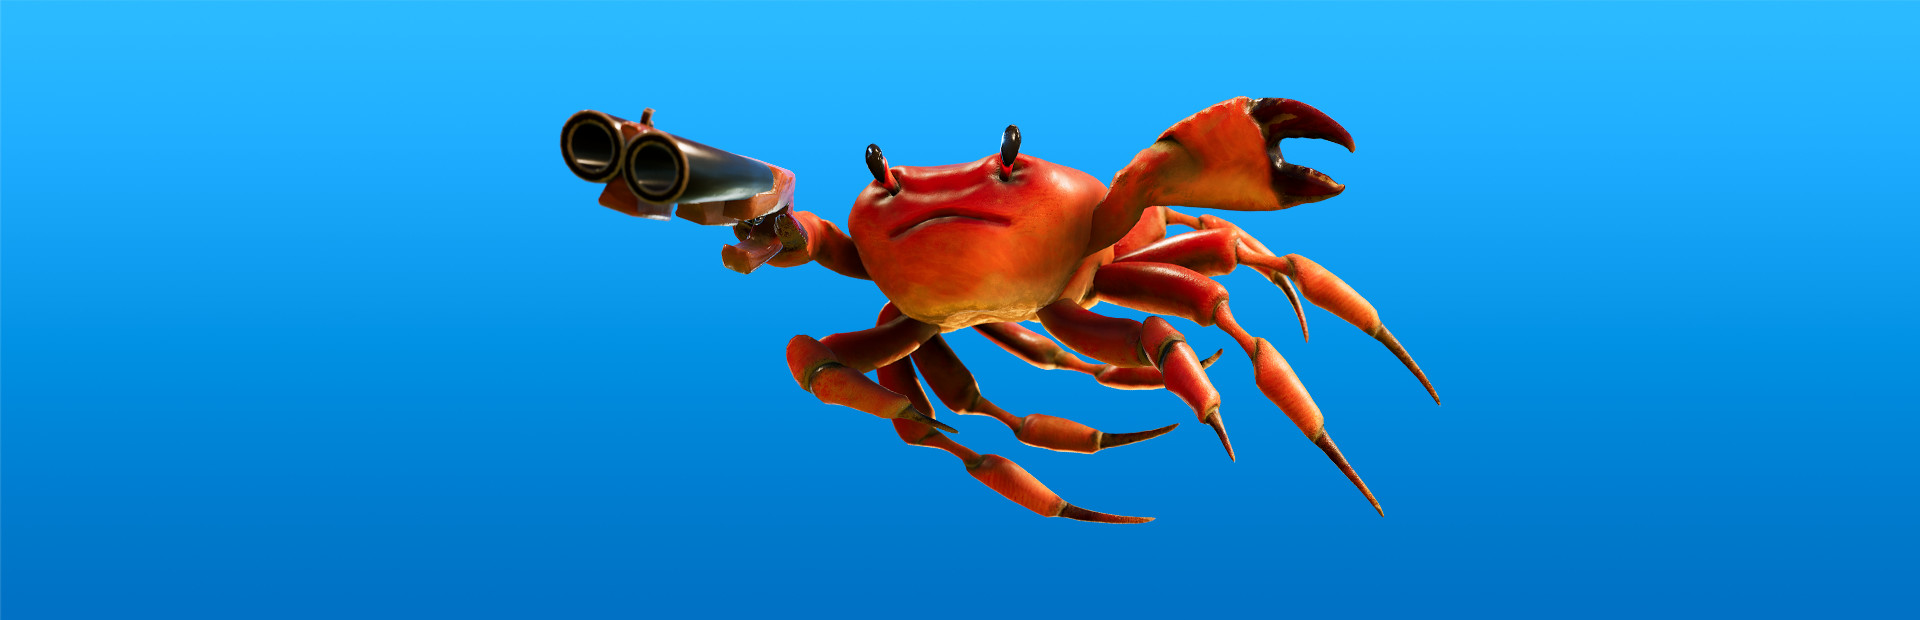 Crab Champions cover image